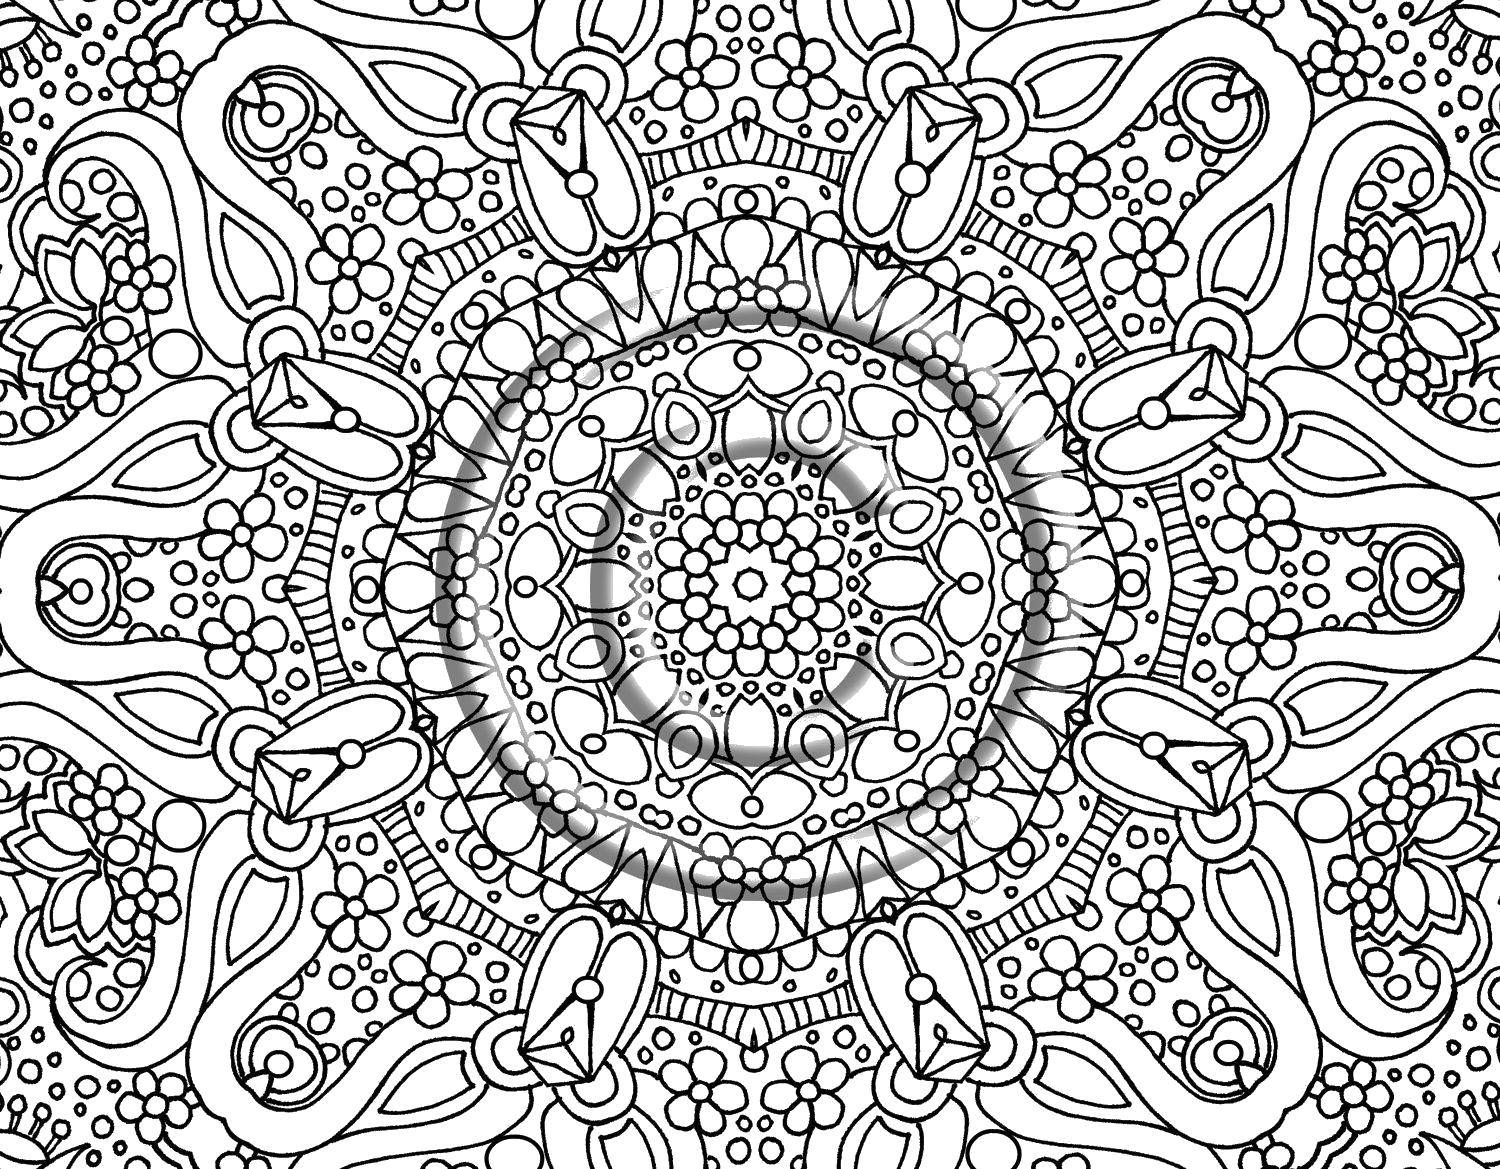 Coloring A complex pattern. Category patterns. Tags:  Patterns, geometric.